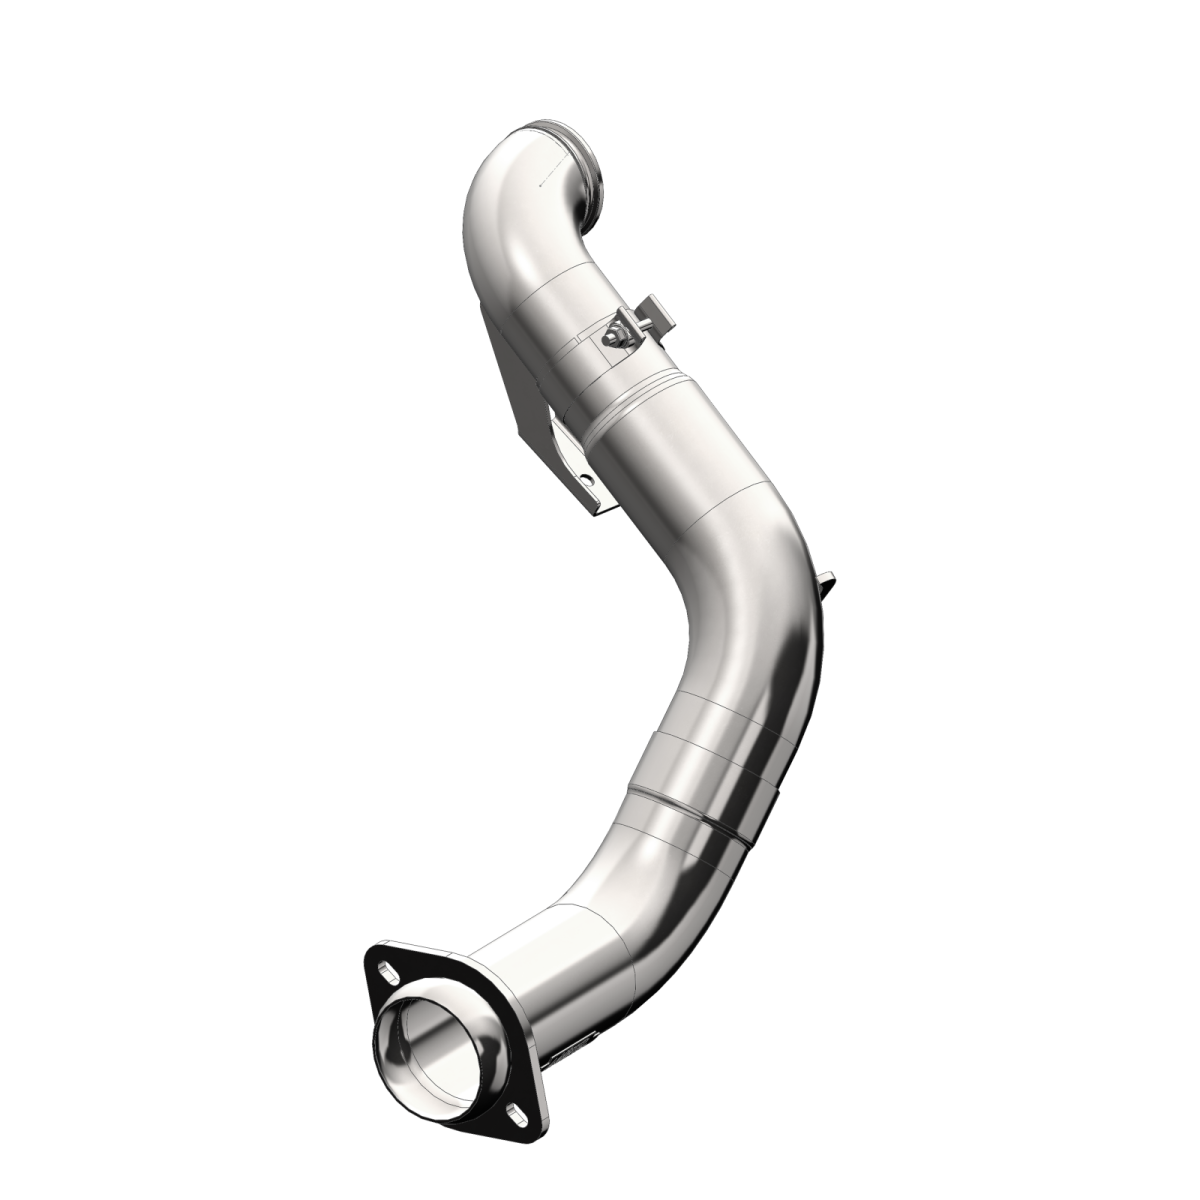 MBRP - MBRP 4 Inch Turbo Down Pipe For 15-16 Ford 6.7L Powerstroke Non Cab and Chassis Only T409 Stainless Steel EO Num. D-763-1 FS9CA460